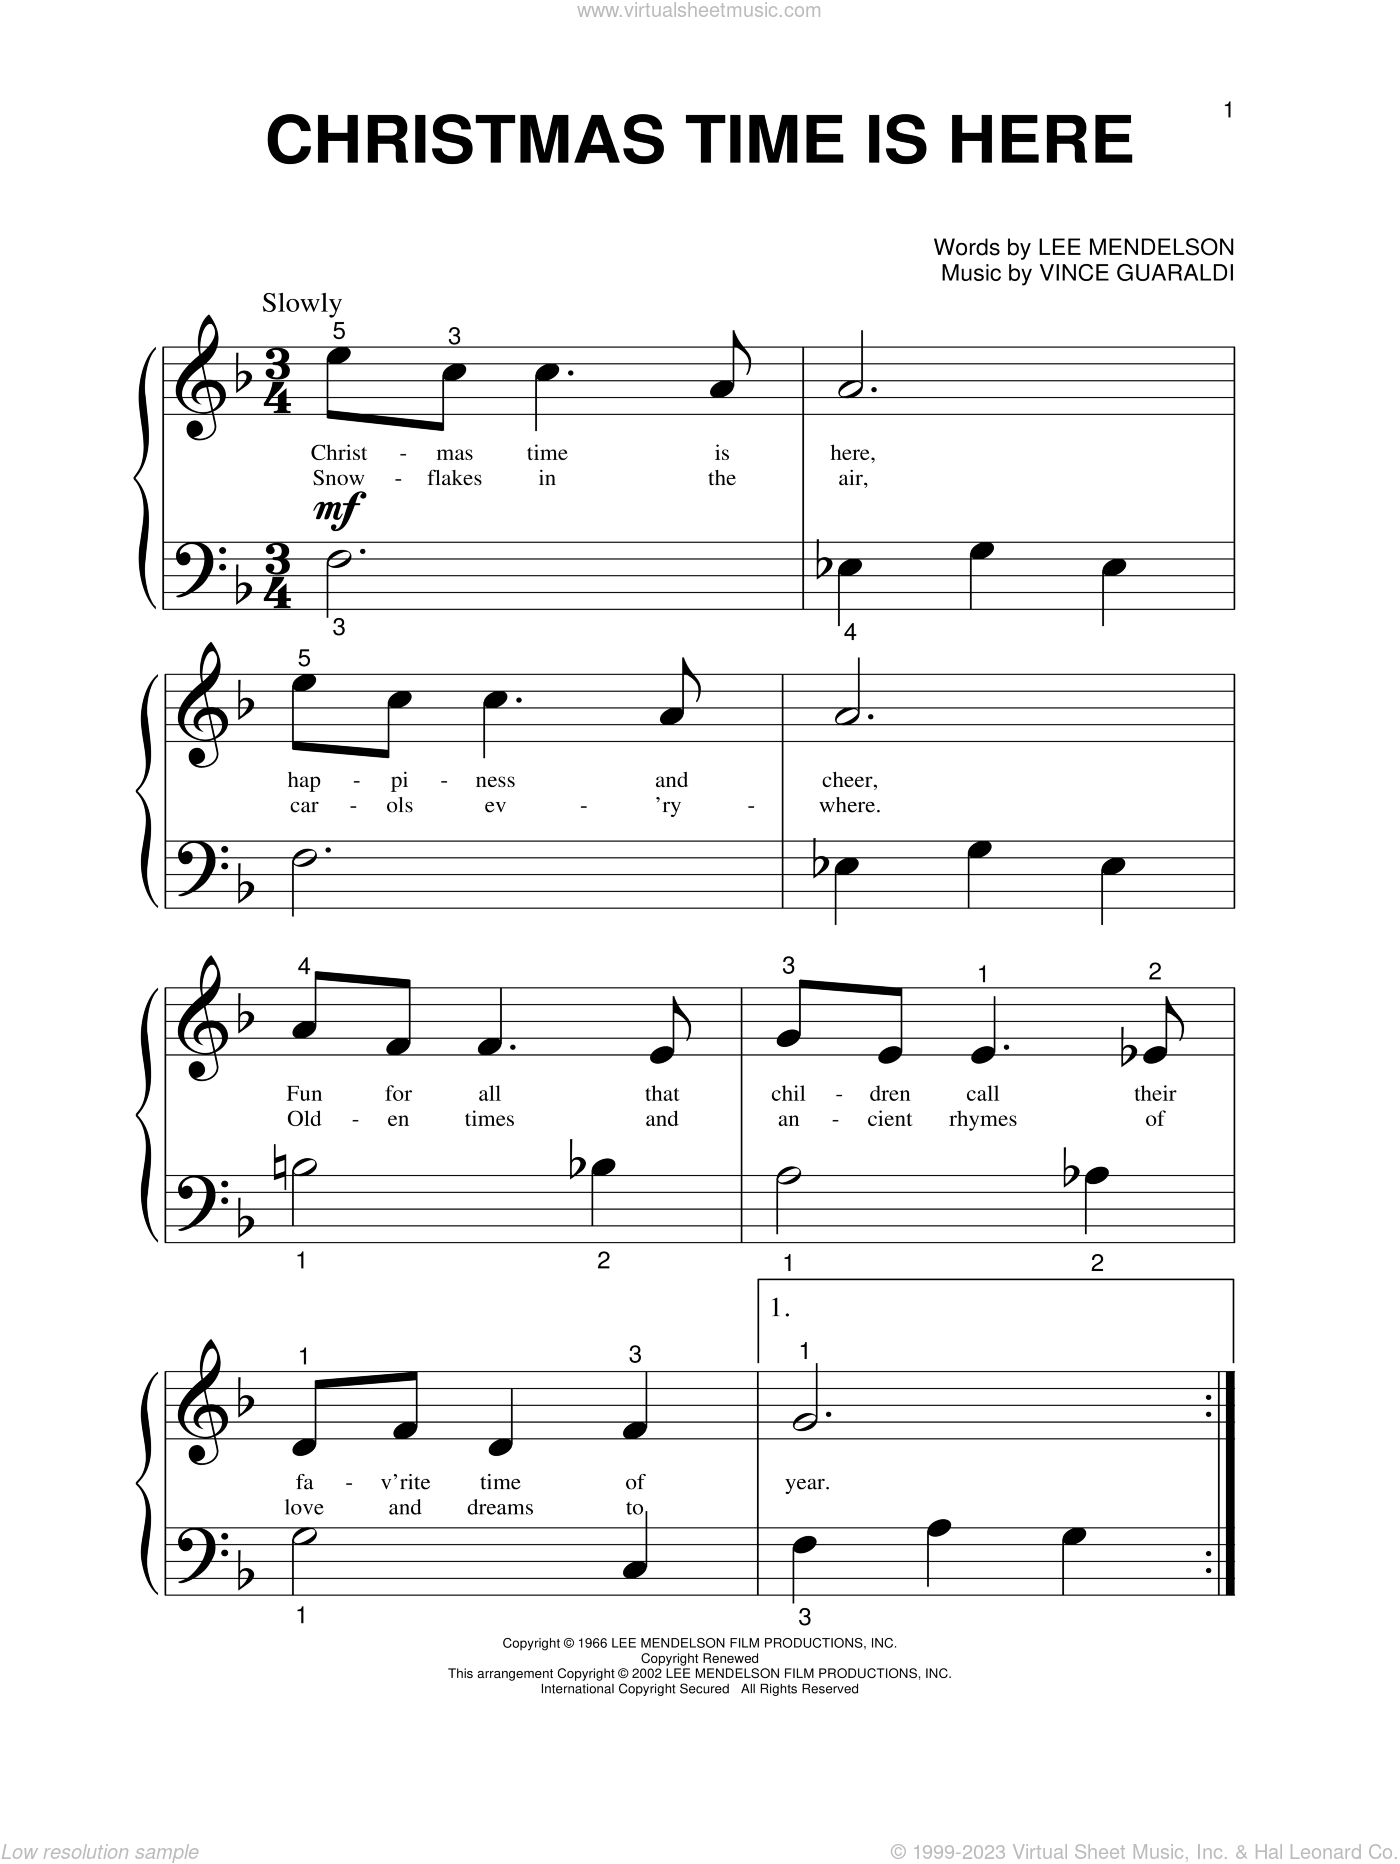 Guaraldi - Christmas Time Is Here sheet music for piano ...